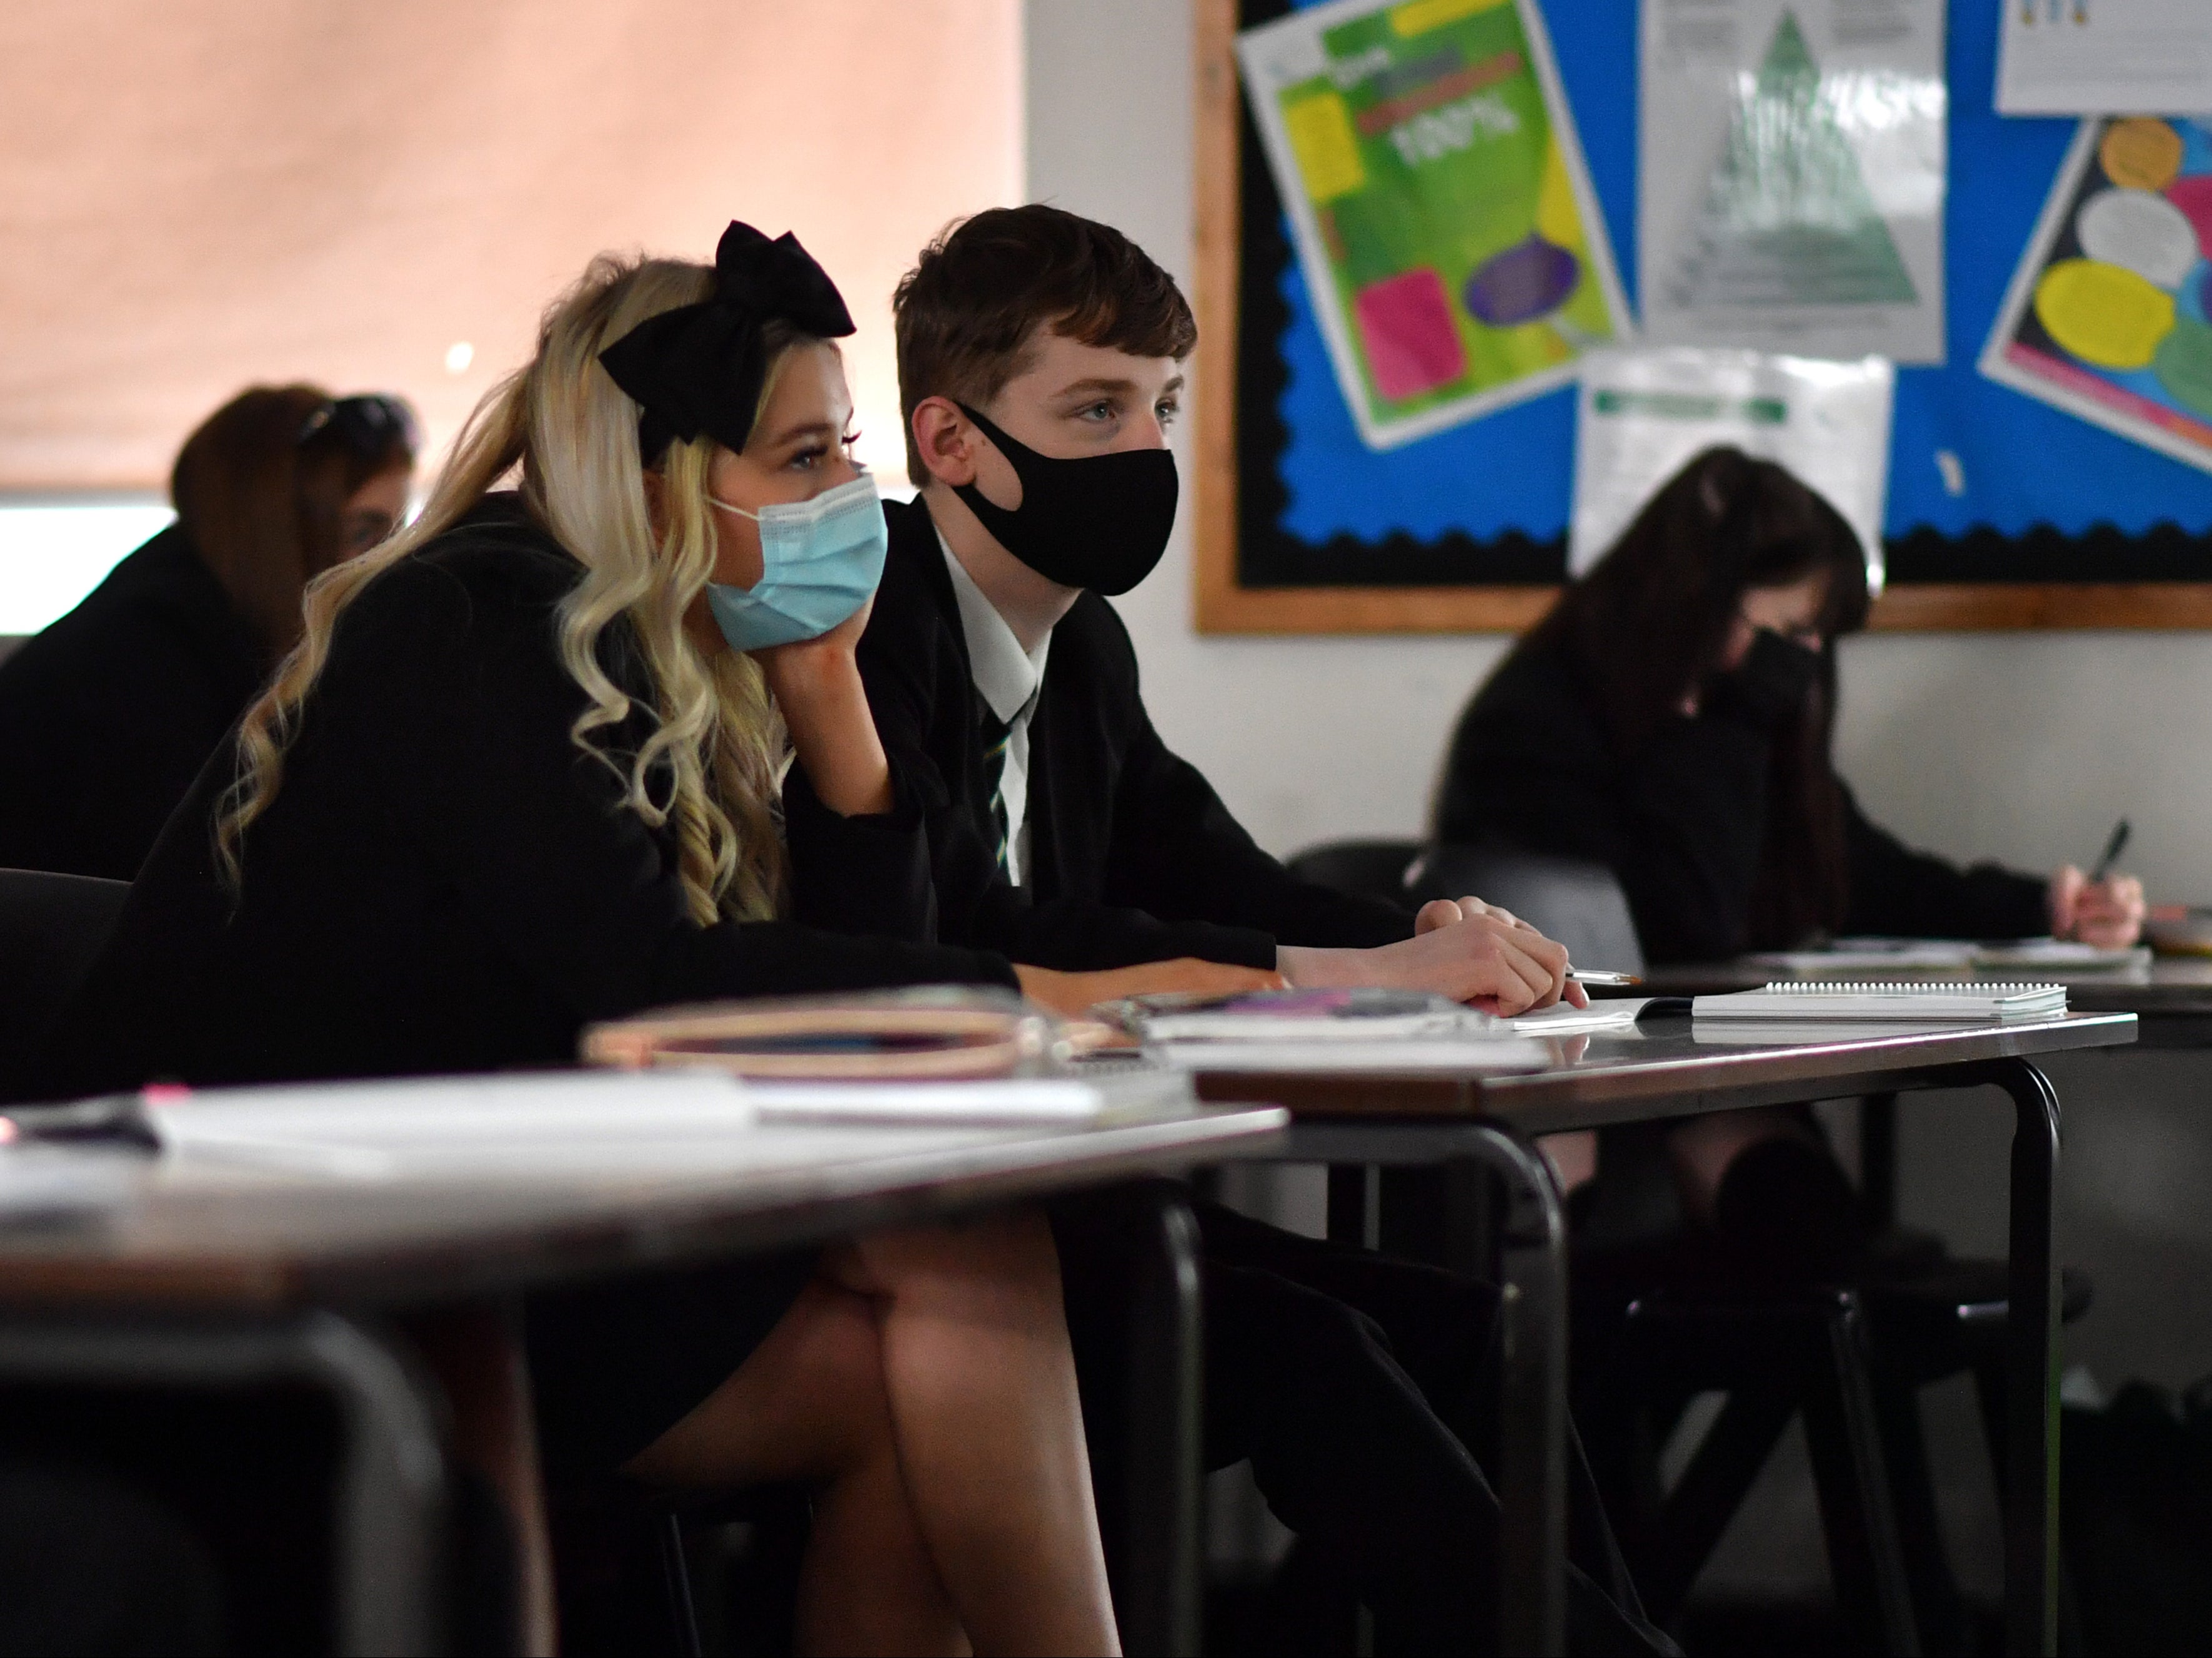 In May, the government scrapped guidance telling secondary school pupils in England to wear face masks in classrooms